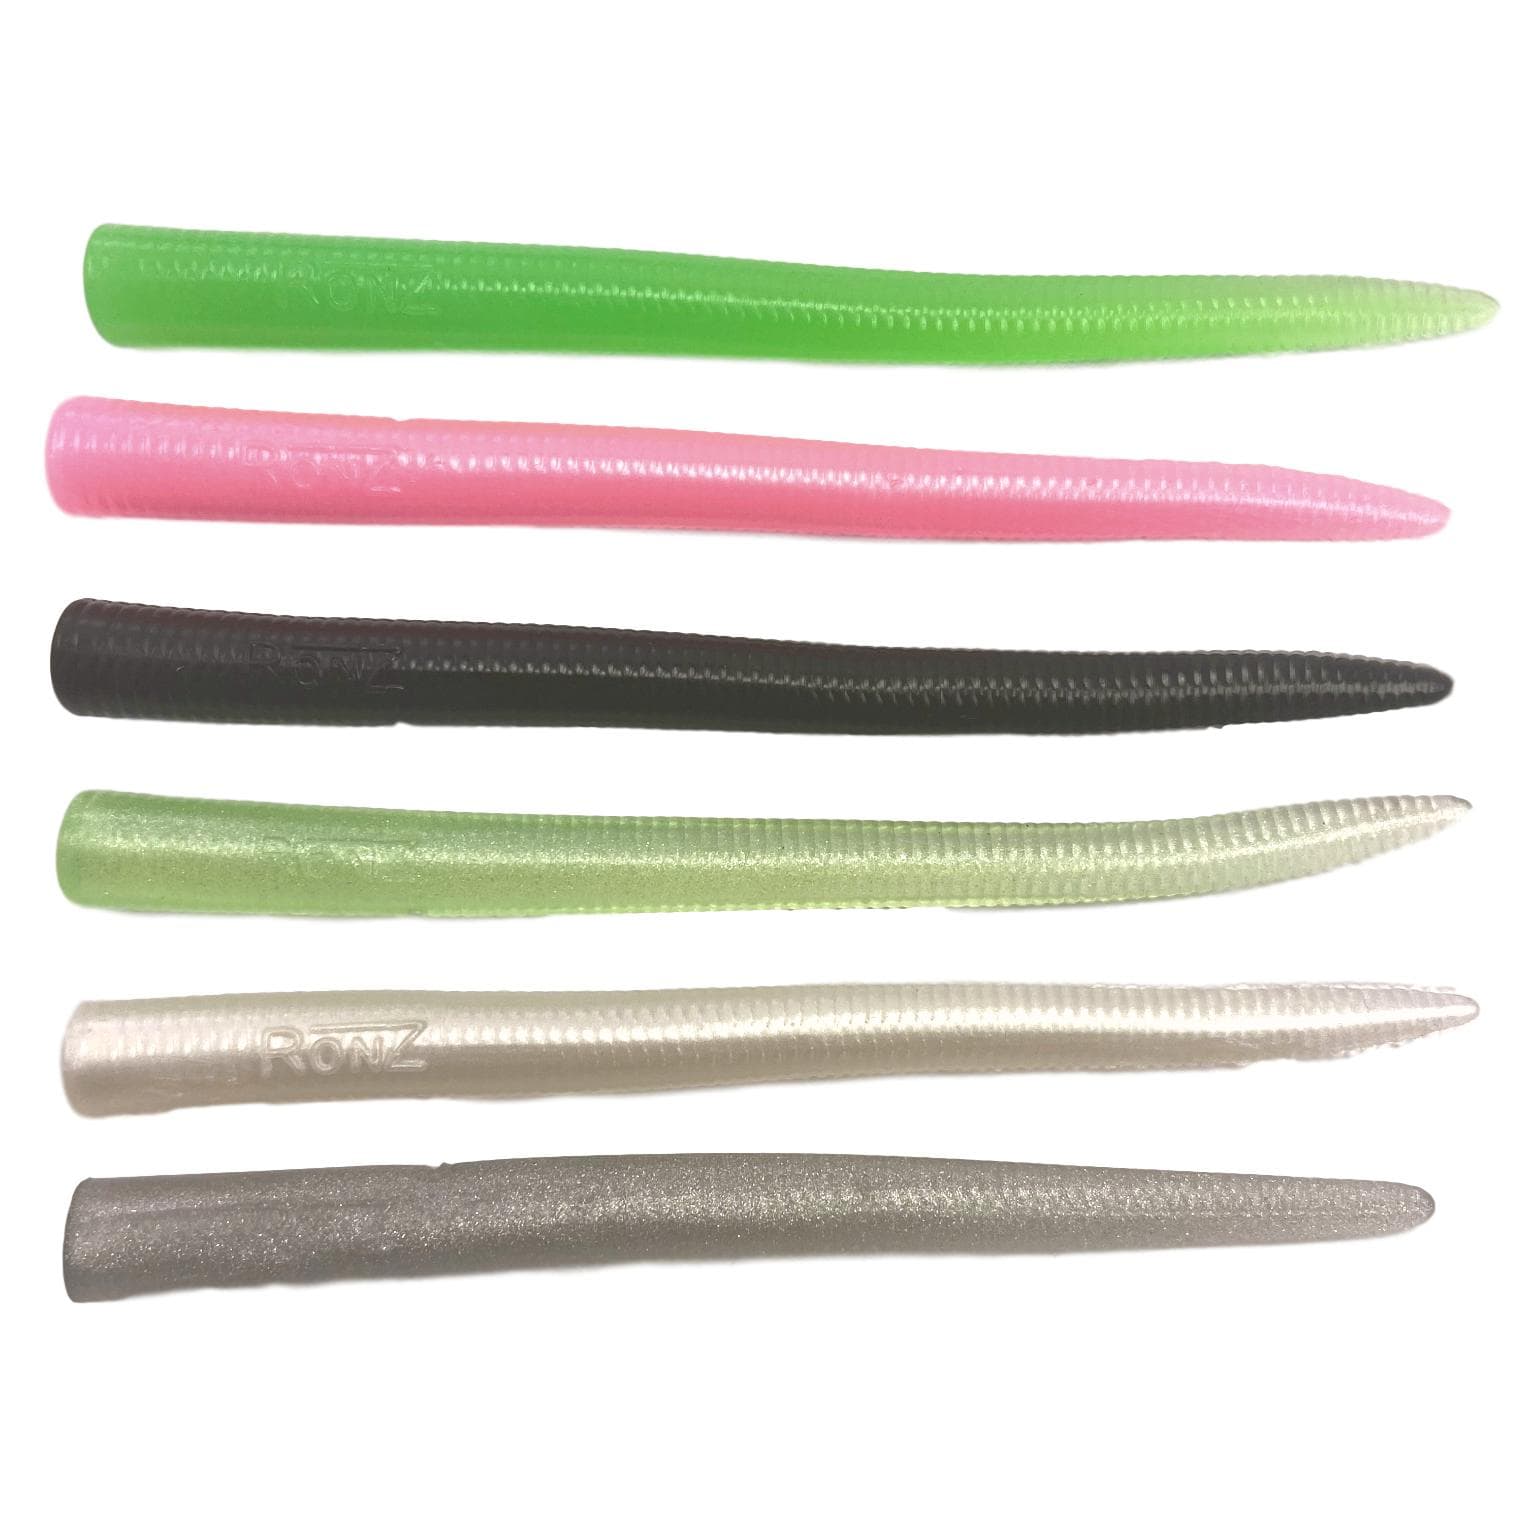 RonZ 6 Replacement Tails, Pink